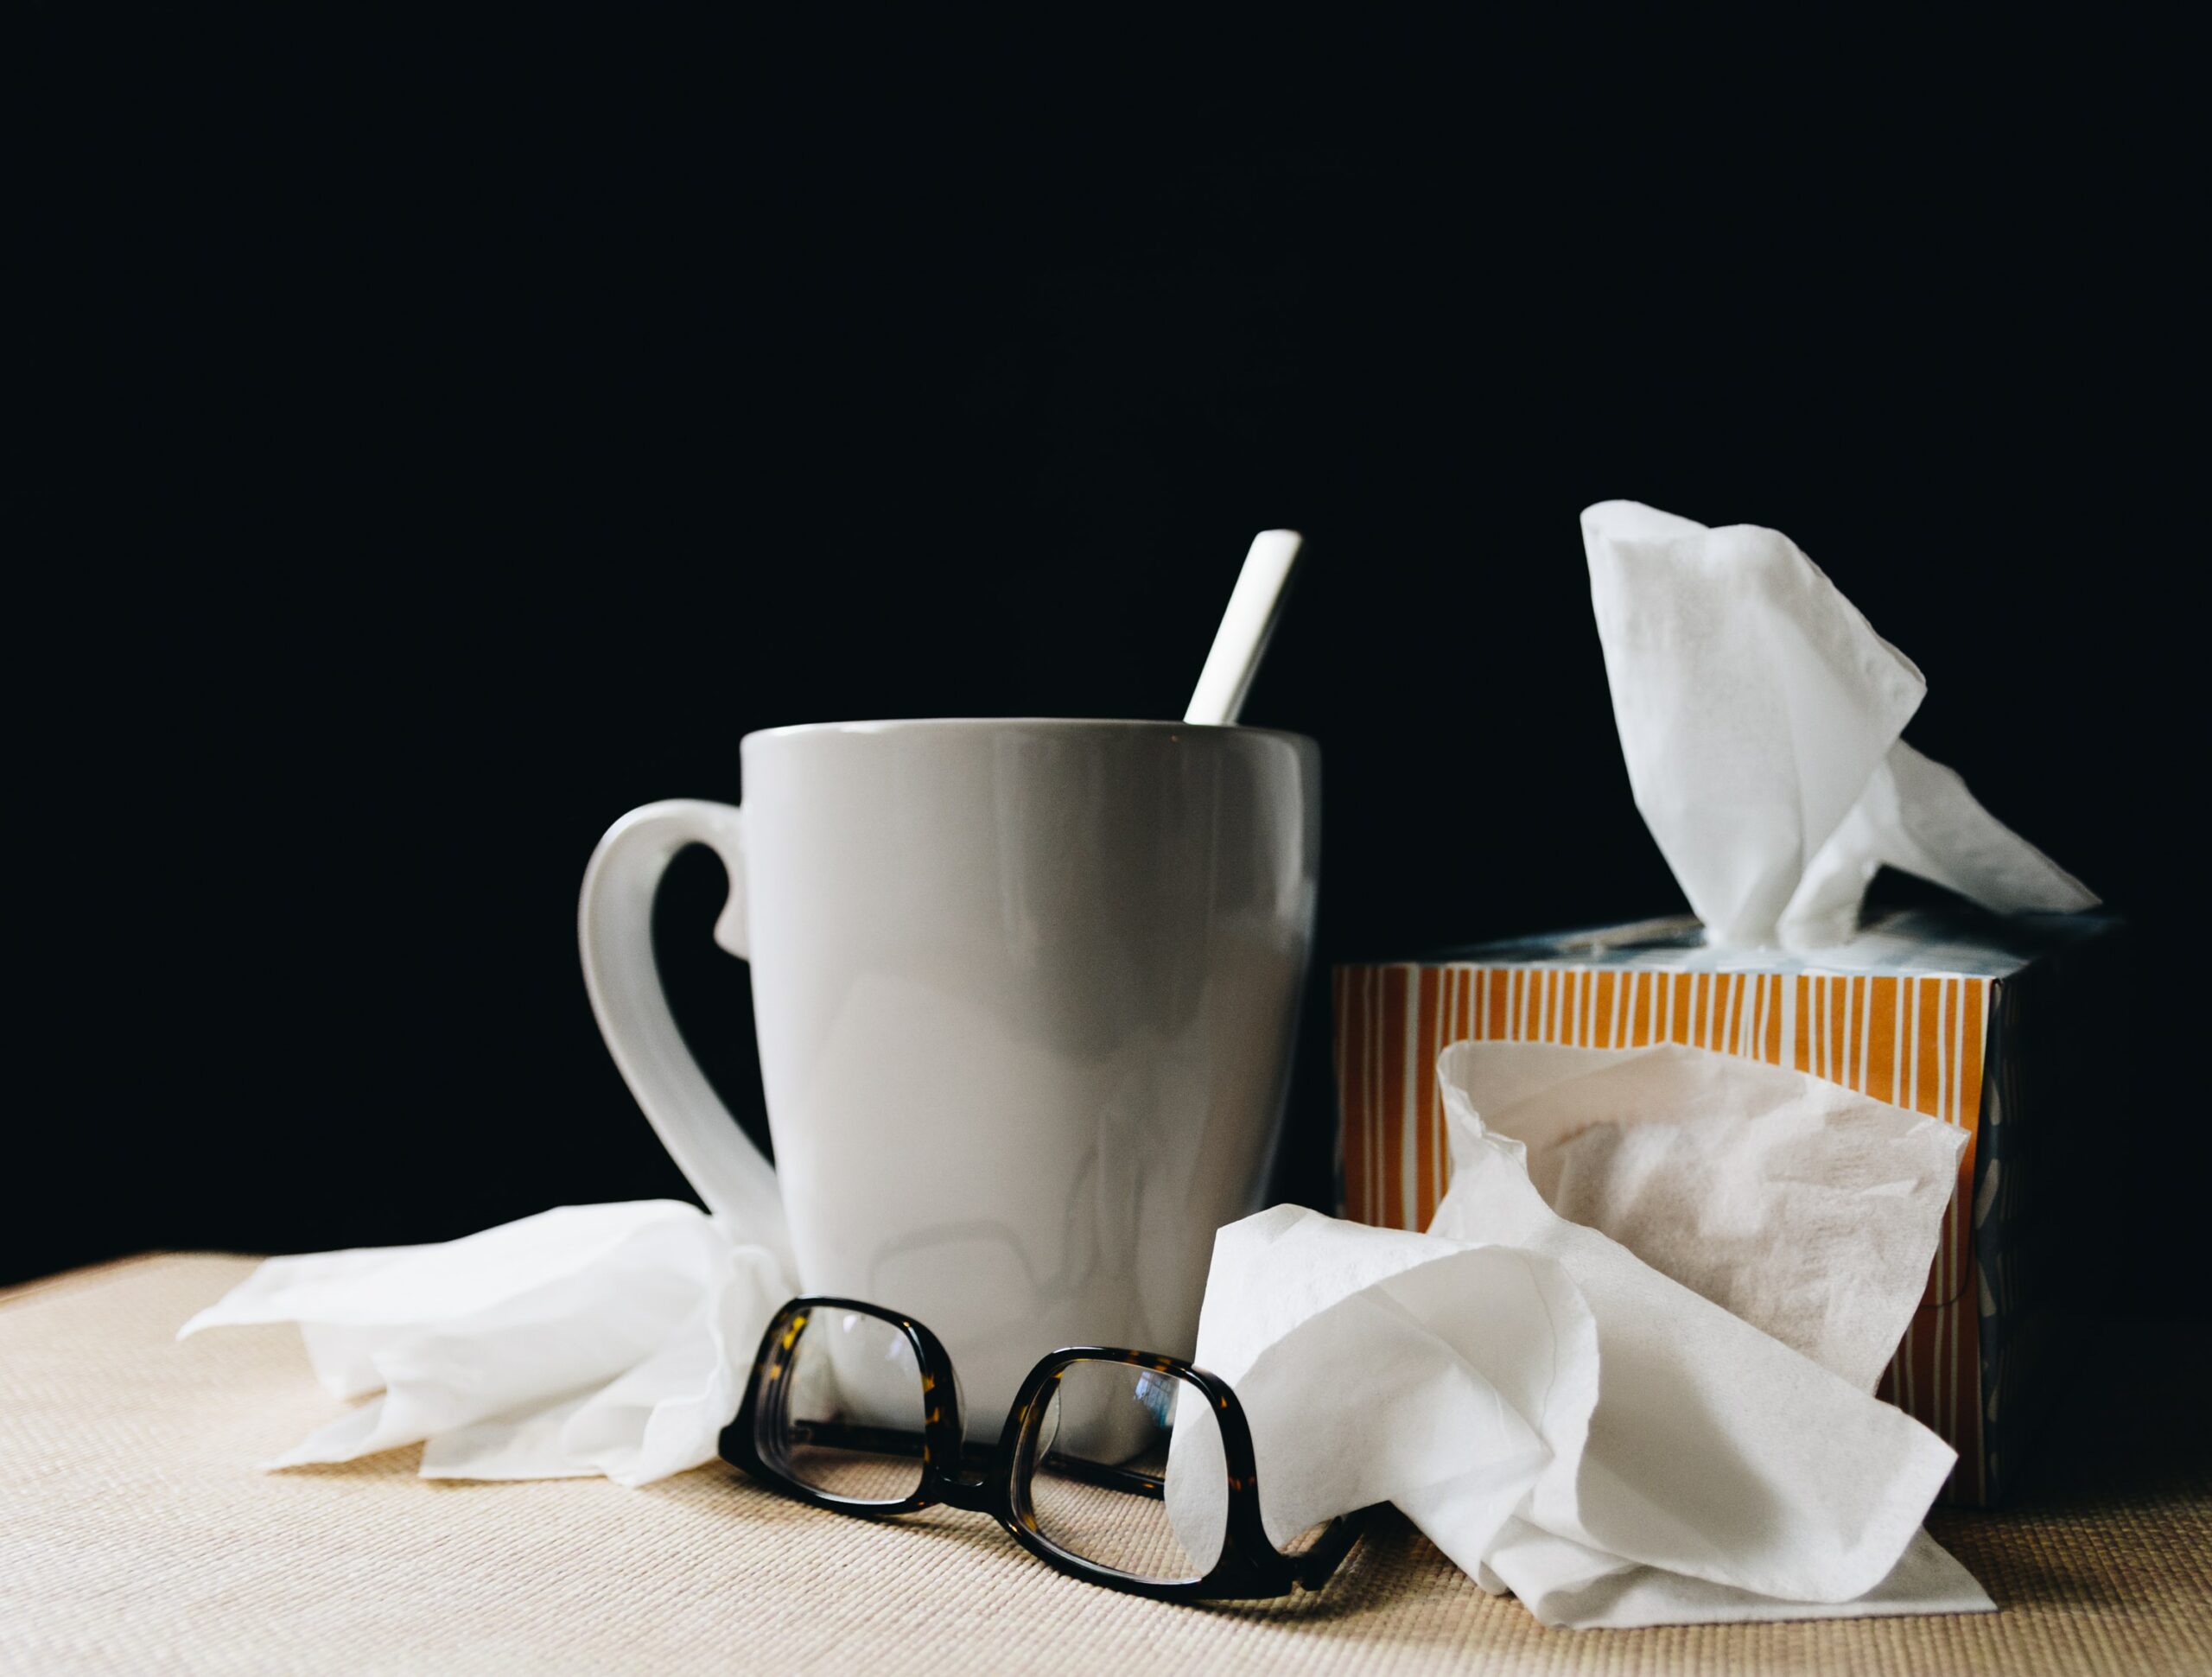 A box of tissues, hot tea, and glasses on a bedside table